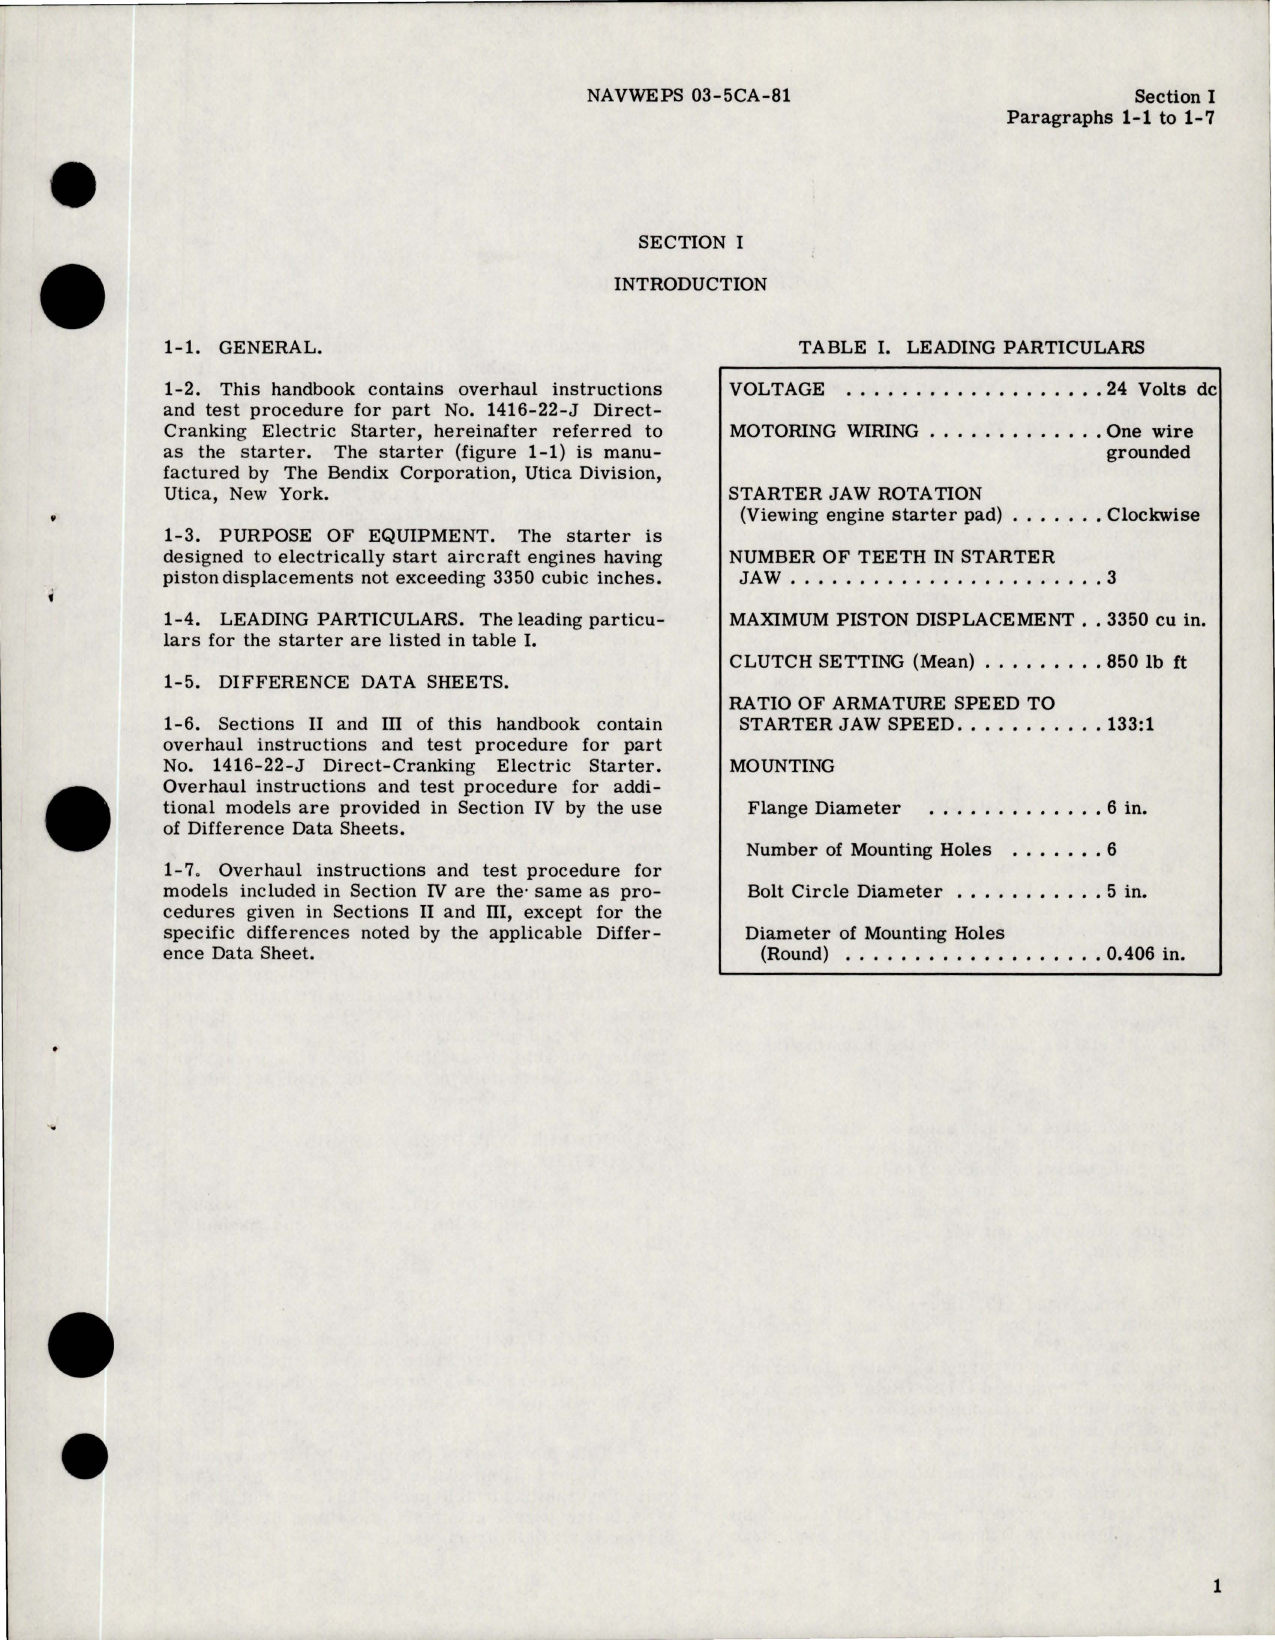 Sample page 7 from AirCorps Library document: Overhaul Instructions for Direct Cranking Electric Starter - Part 1416 and 36E00 Series 